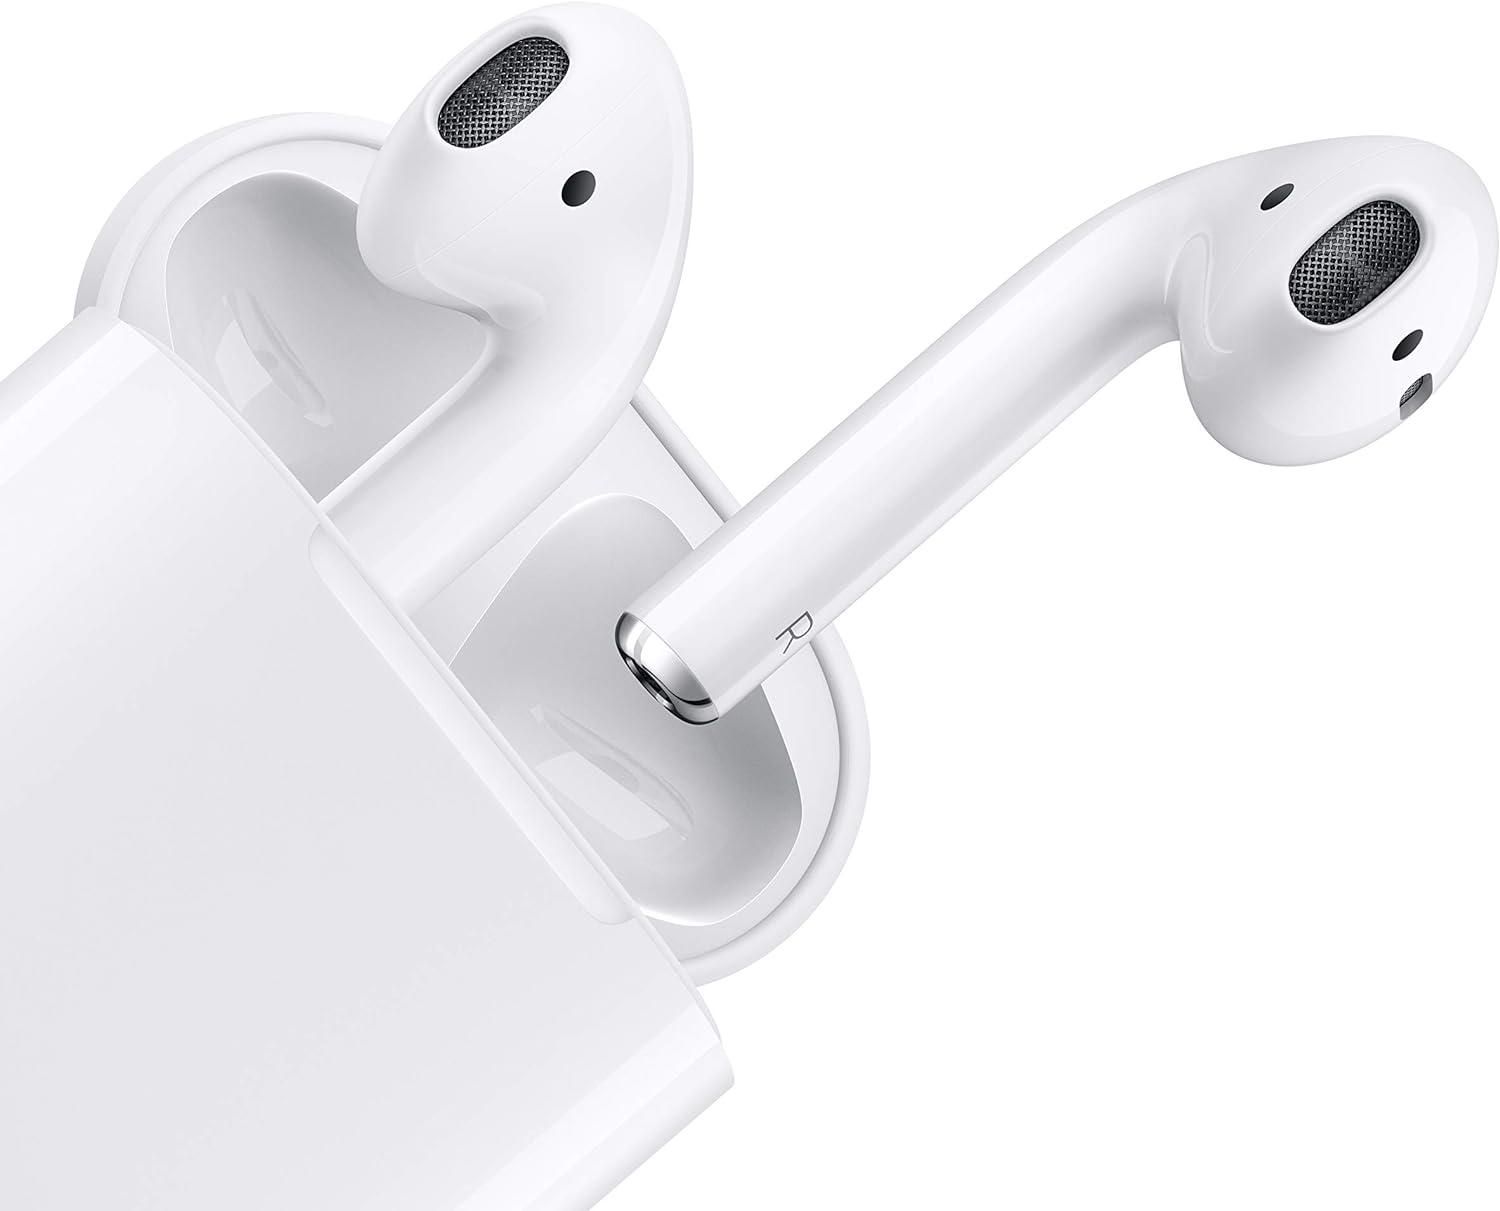 Amazon and Walmart just cut the price of second-generation Apple AirPods to $89